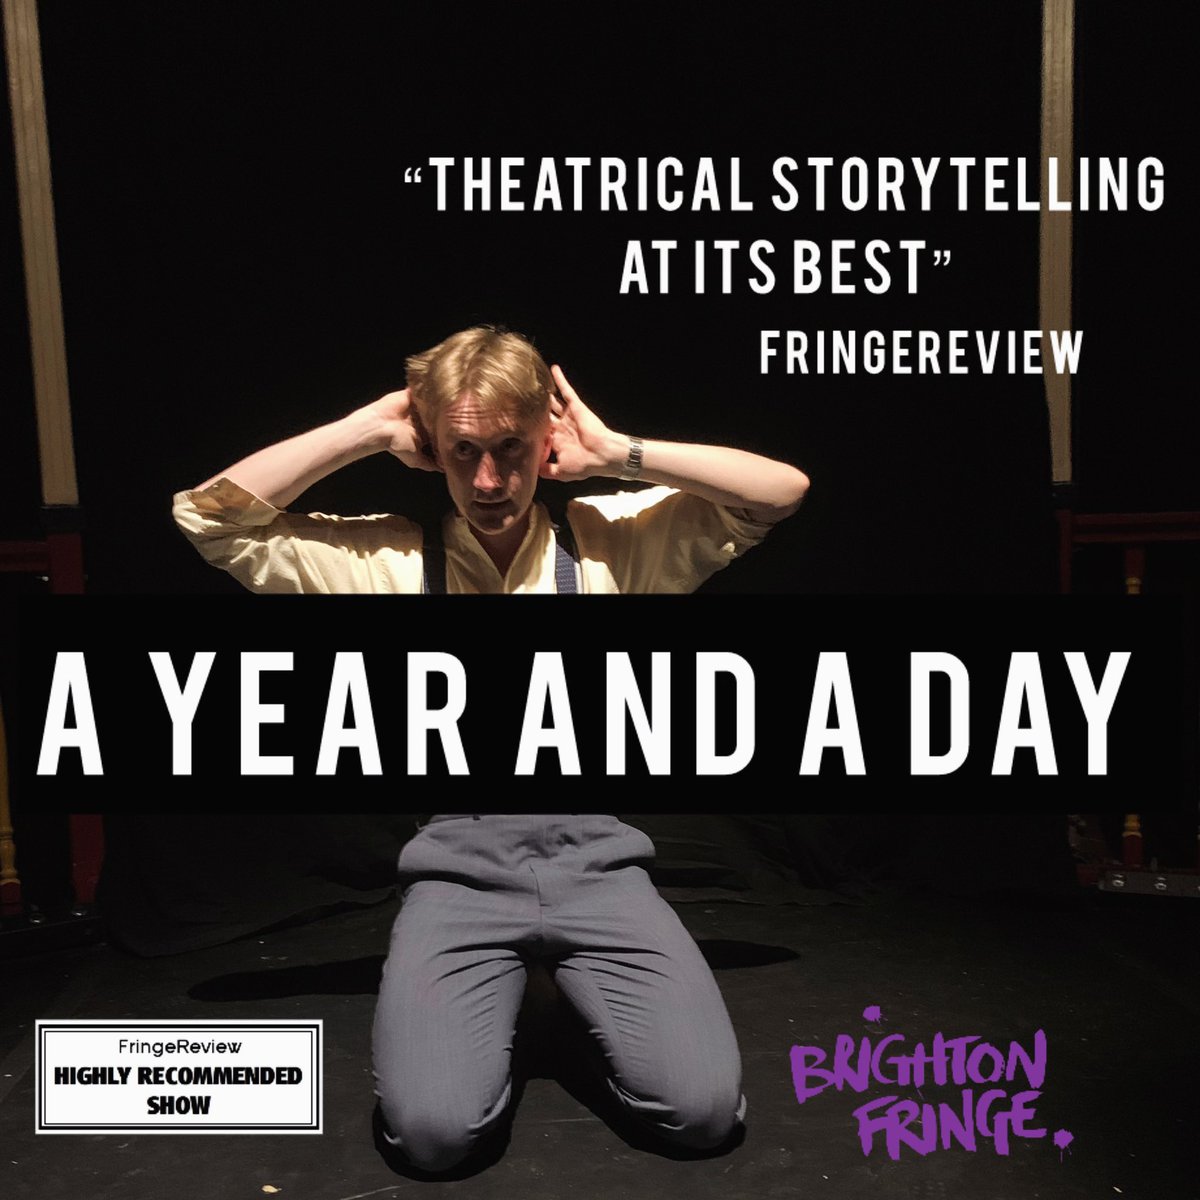 Fringereview gave us a highly recommended rating! We’re so pleased! We’ve got three more shows at @brightonfringe at 18.15 Friday - Sunday.
@rotundadomeuk 
brightonfringe.org/events/a-year-…

#theatre #fringetheatre #ayaad #brightonfringe #brighton #storytelling